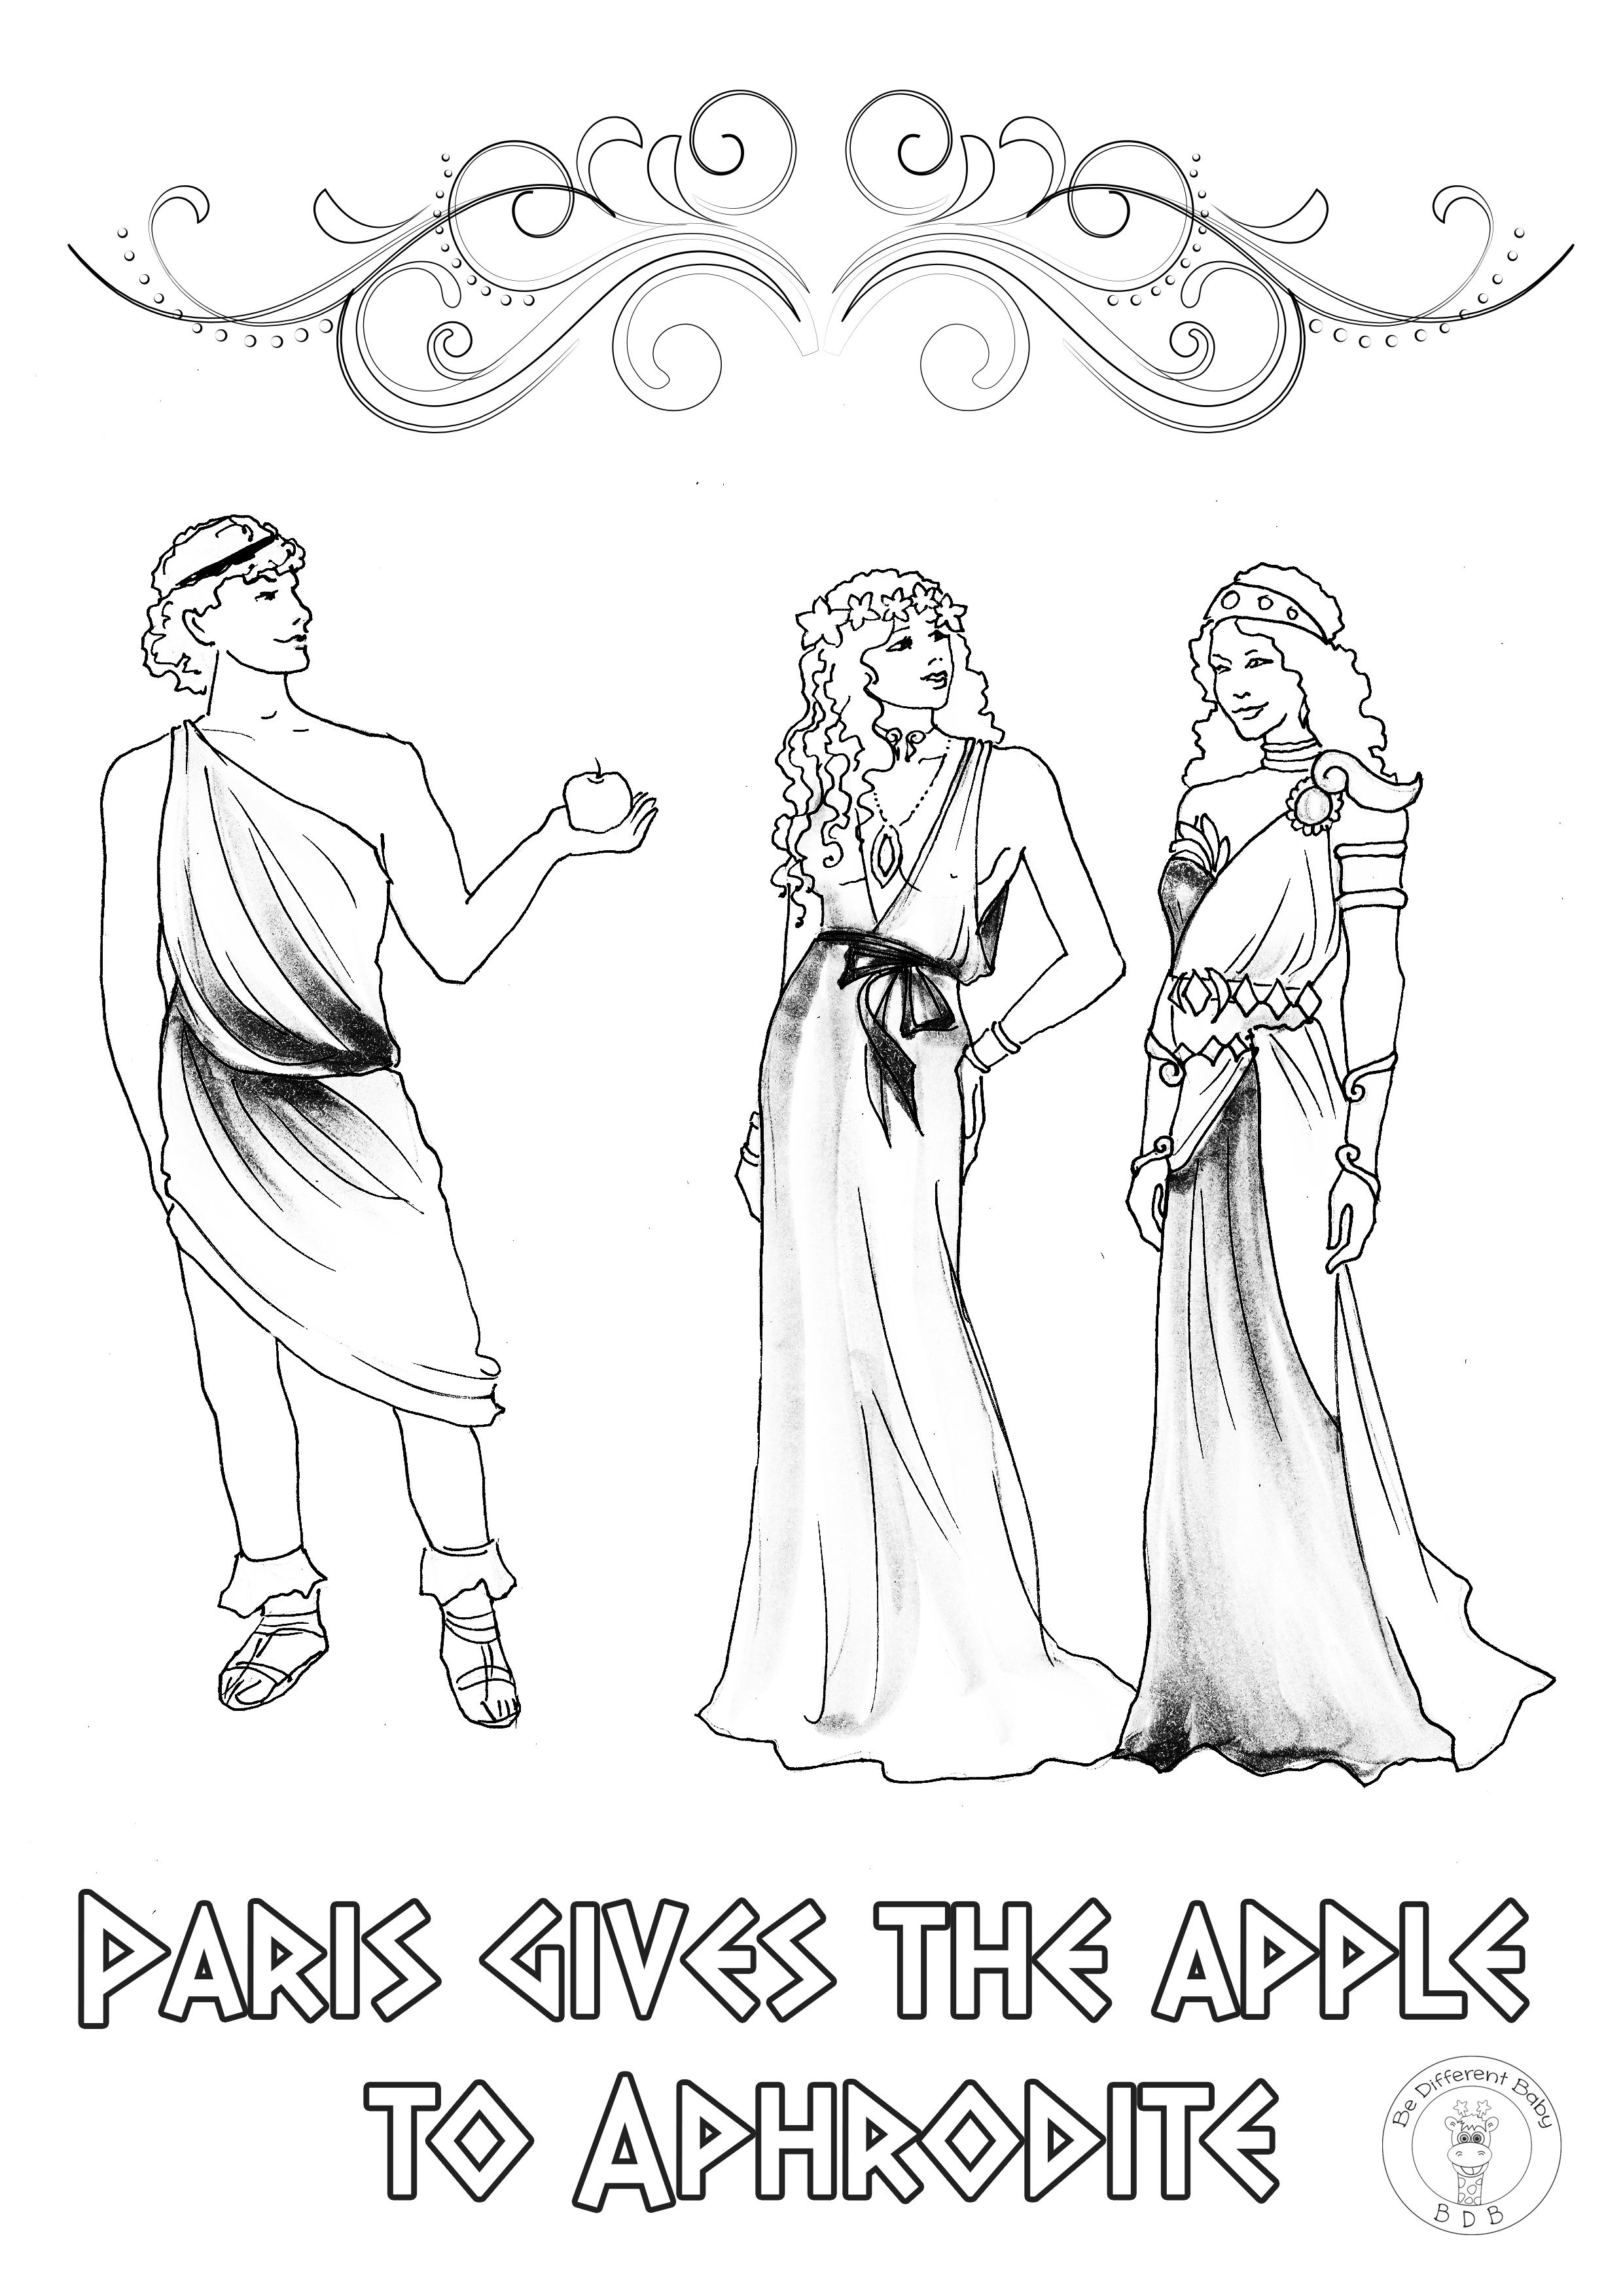 Greek mythology coloring pagesif you and your children love greek mythology this is a must have unique hand drawn mythological scenes download now